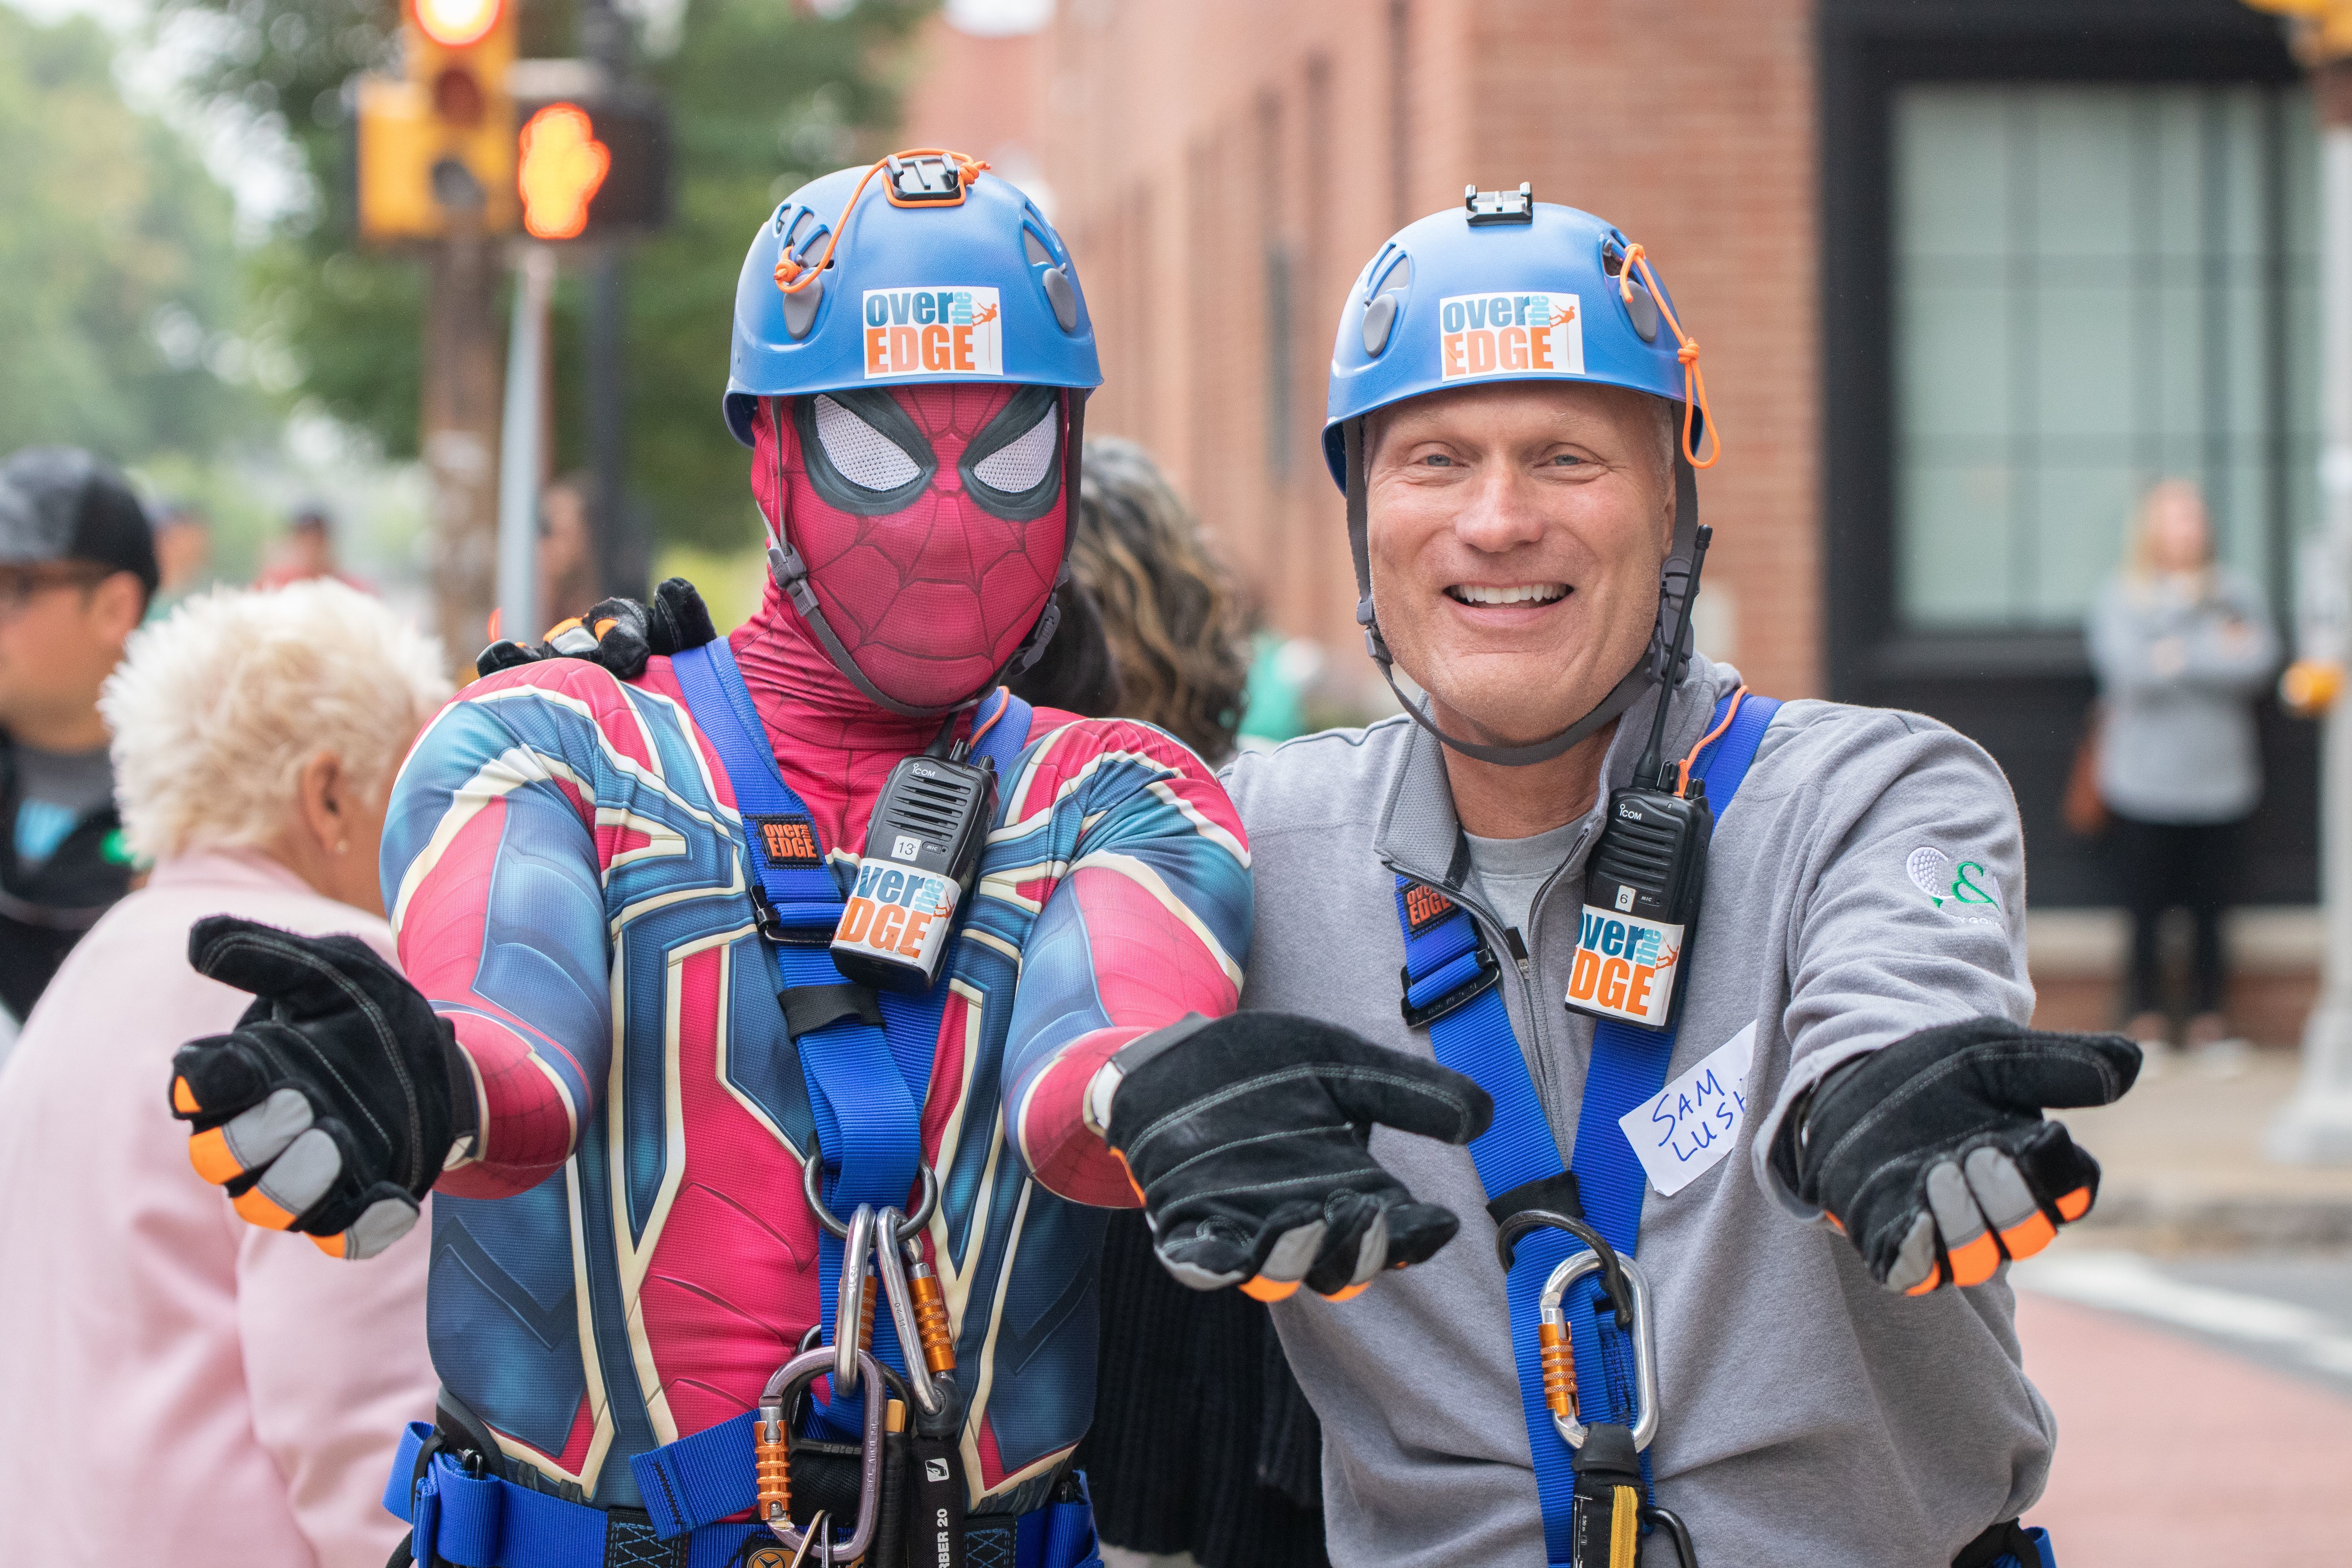 Over the Edge: Williamsport to Return This Fall With a Chance for Participants to 'Descend With the Sun'